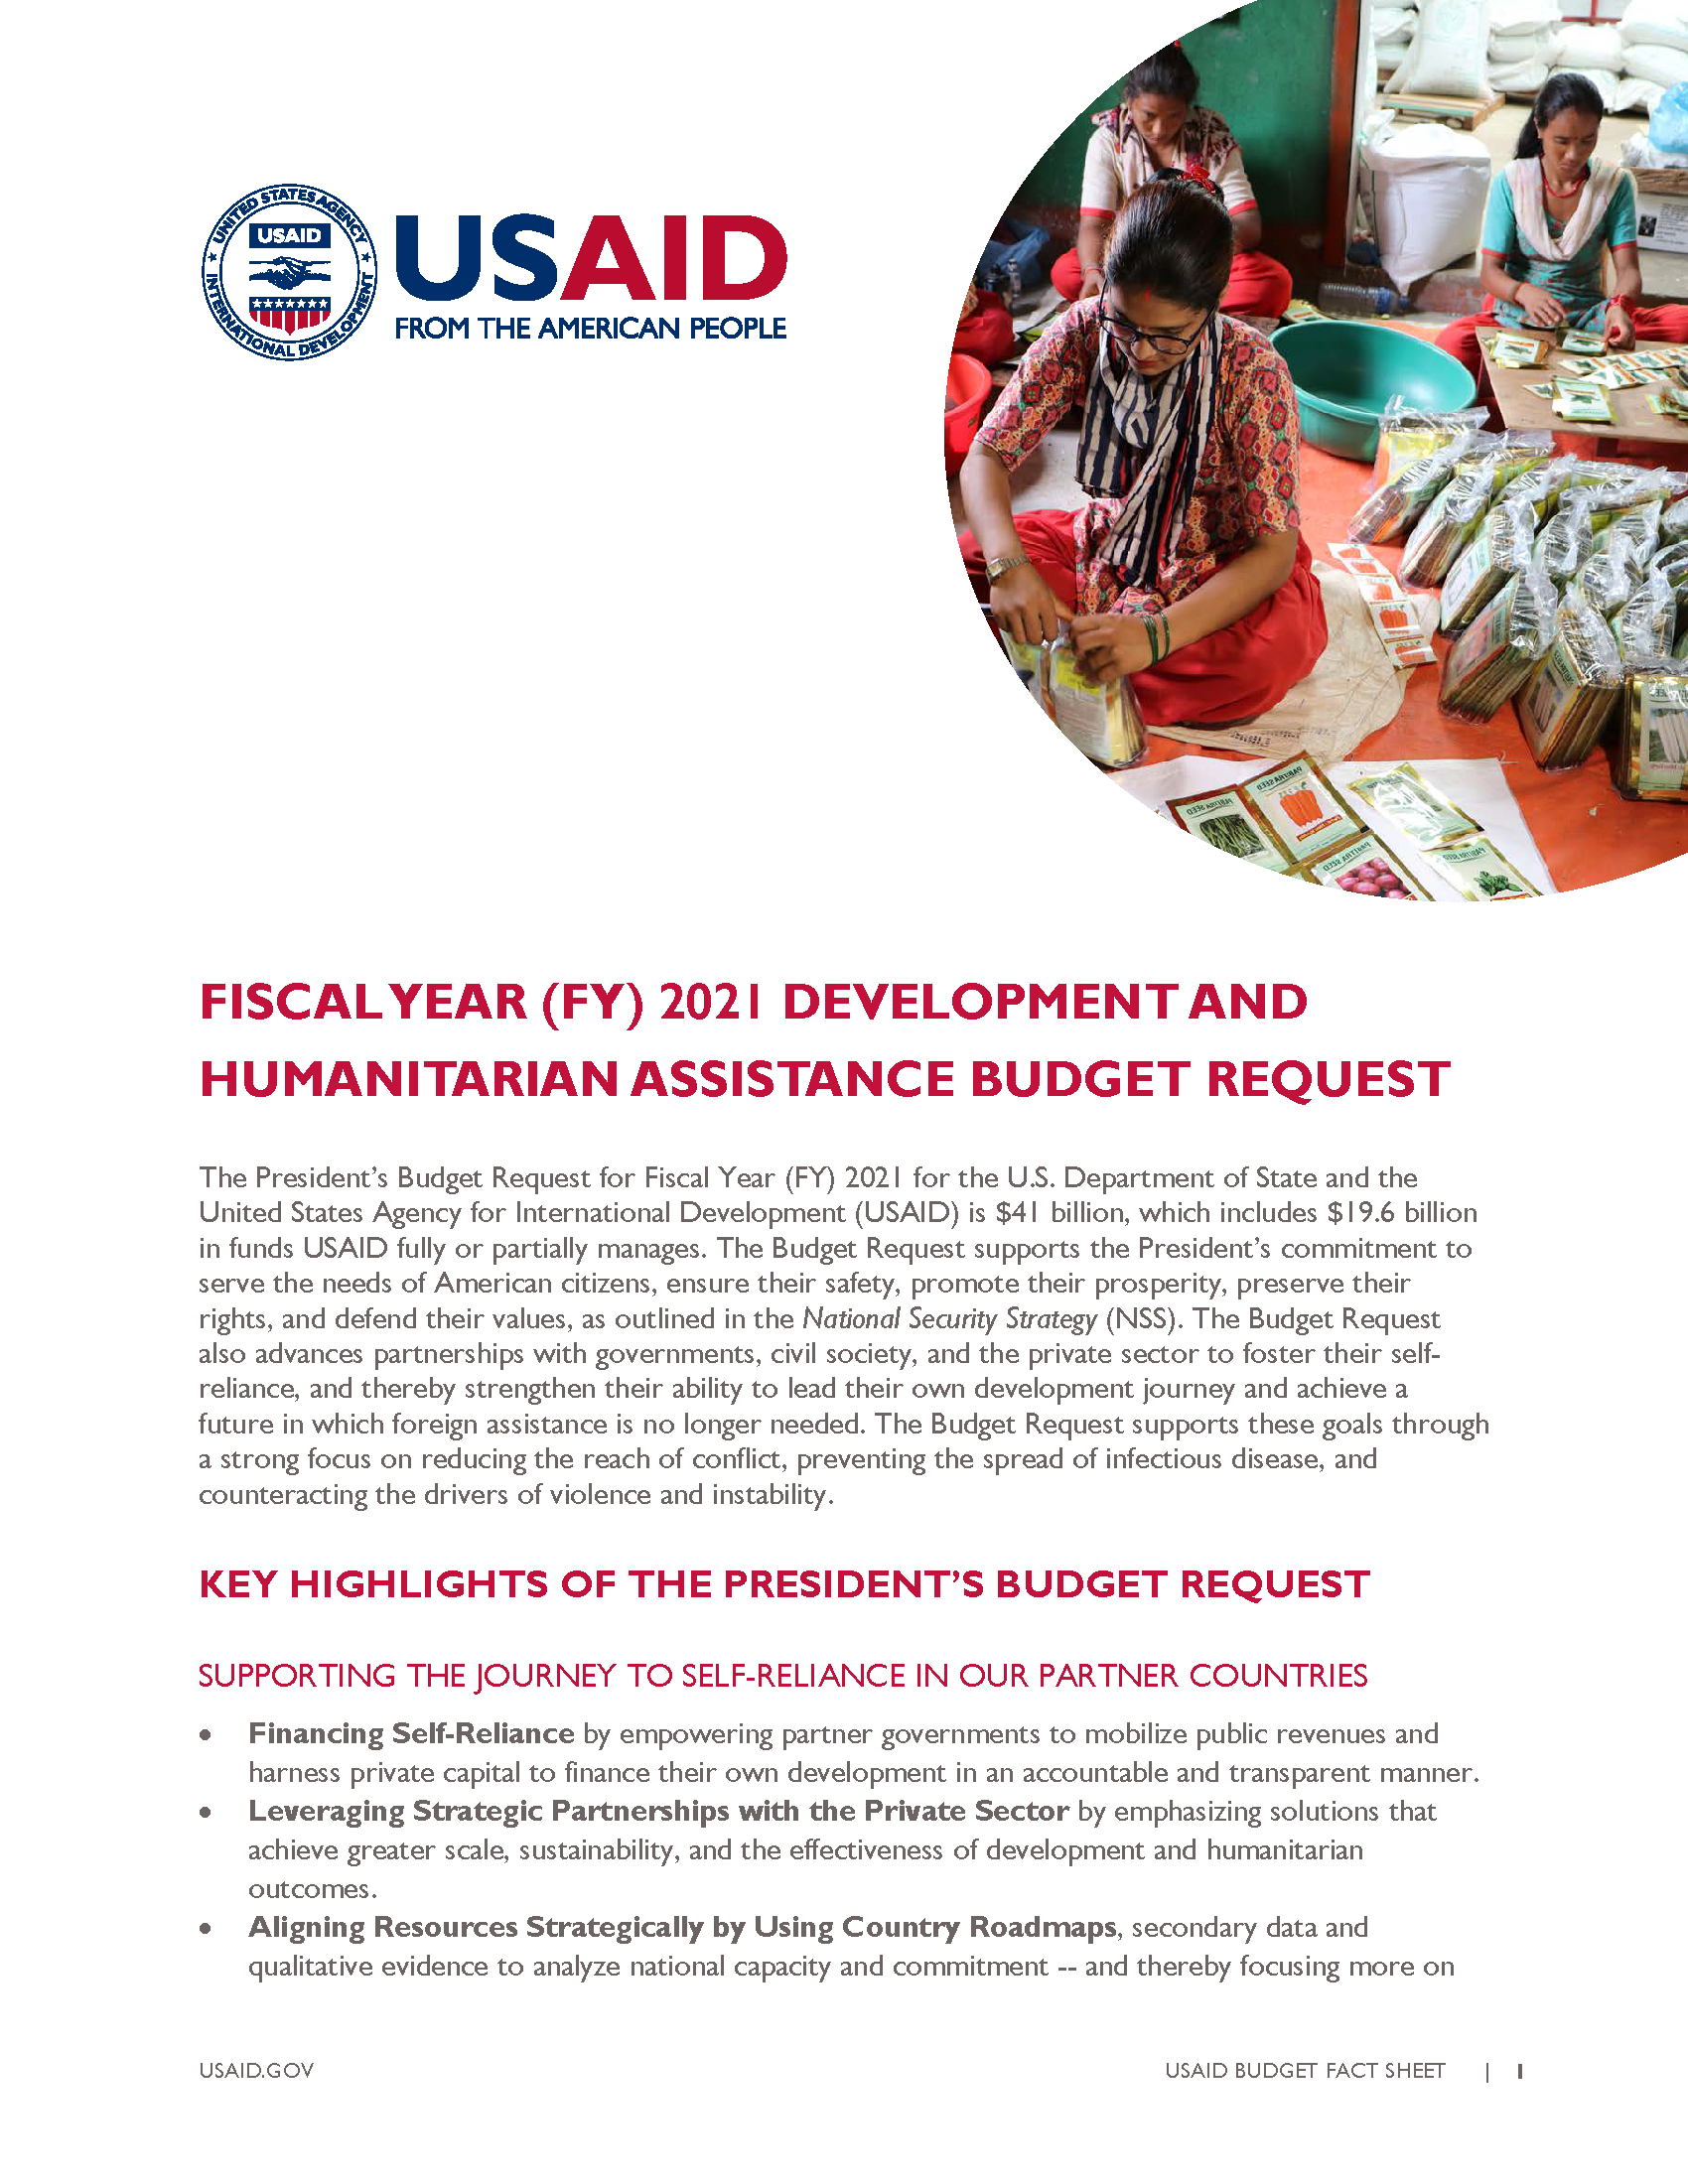 Fact Sheet: Fiscal Year (FY) 2021 Development and Humanitarian Assistance Budget